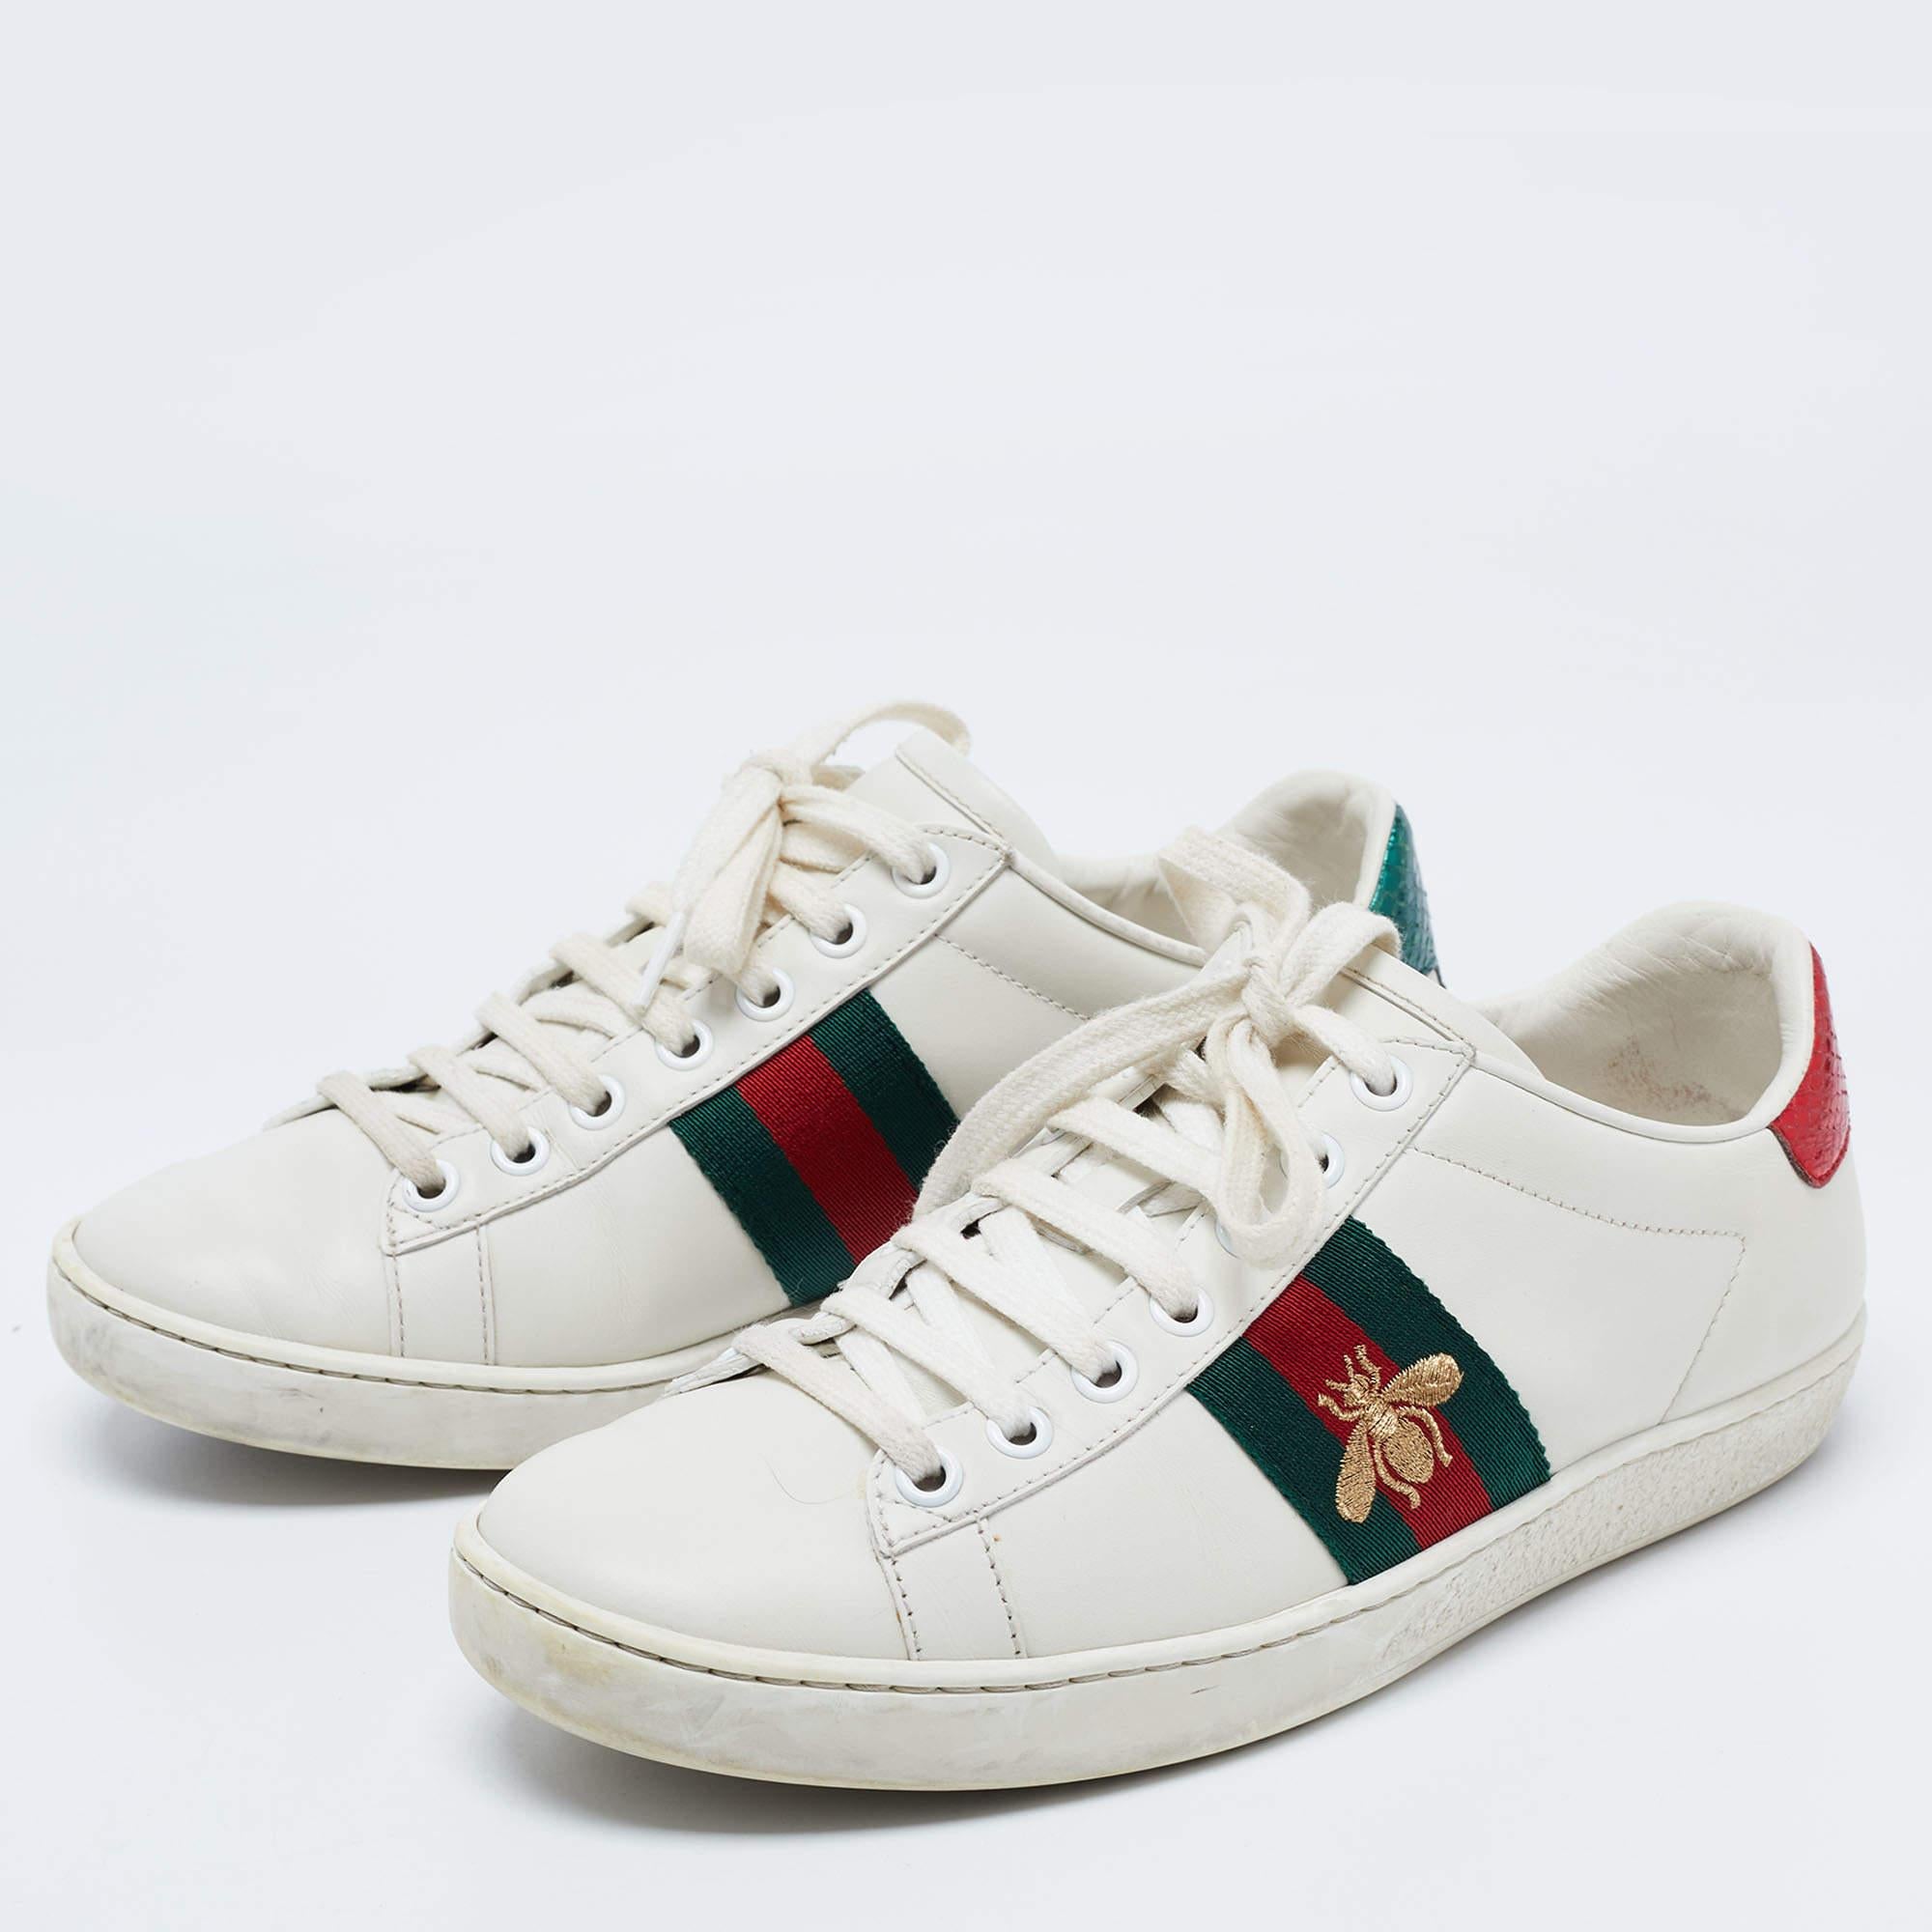 Gucci White Leather Embroidered Bee Ace Sneakers Size 36 4